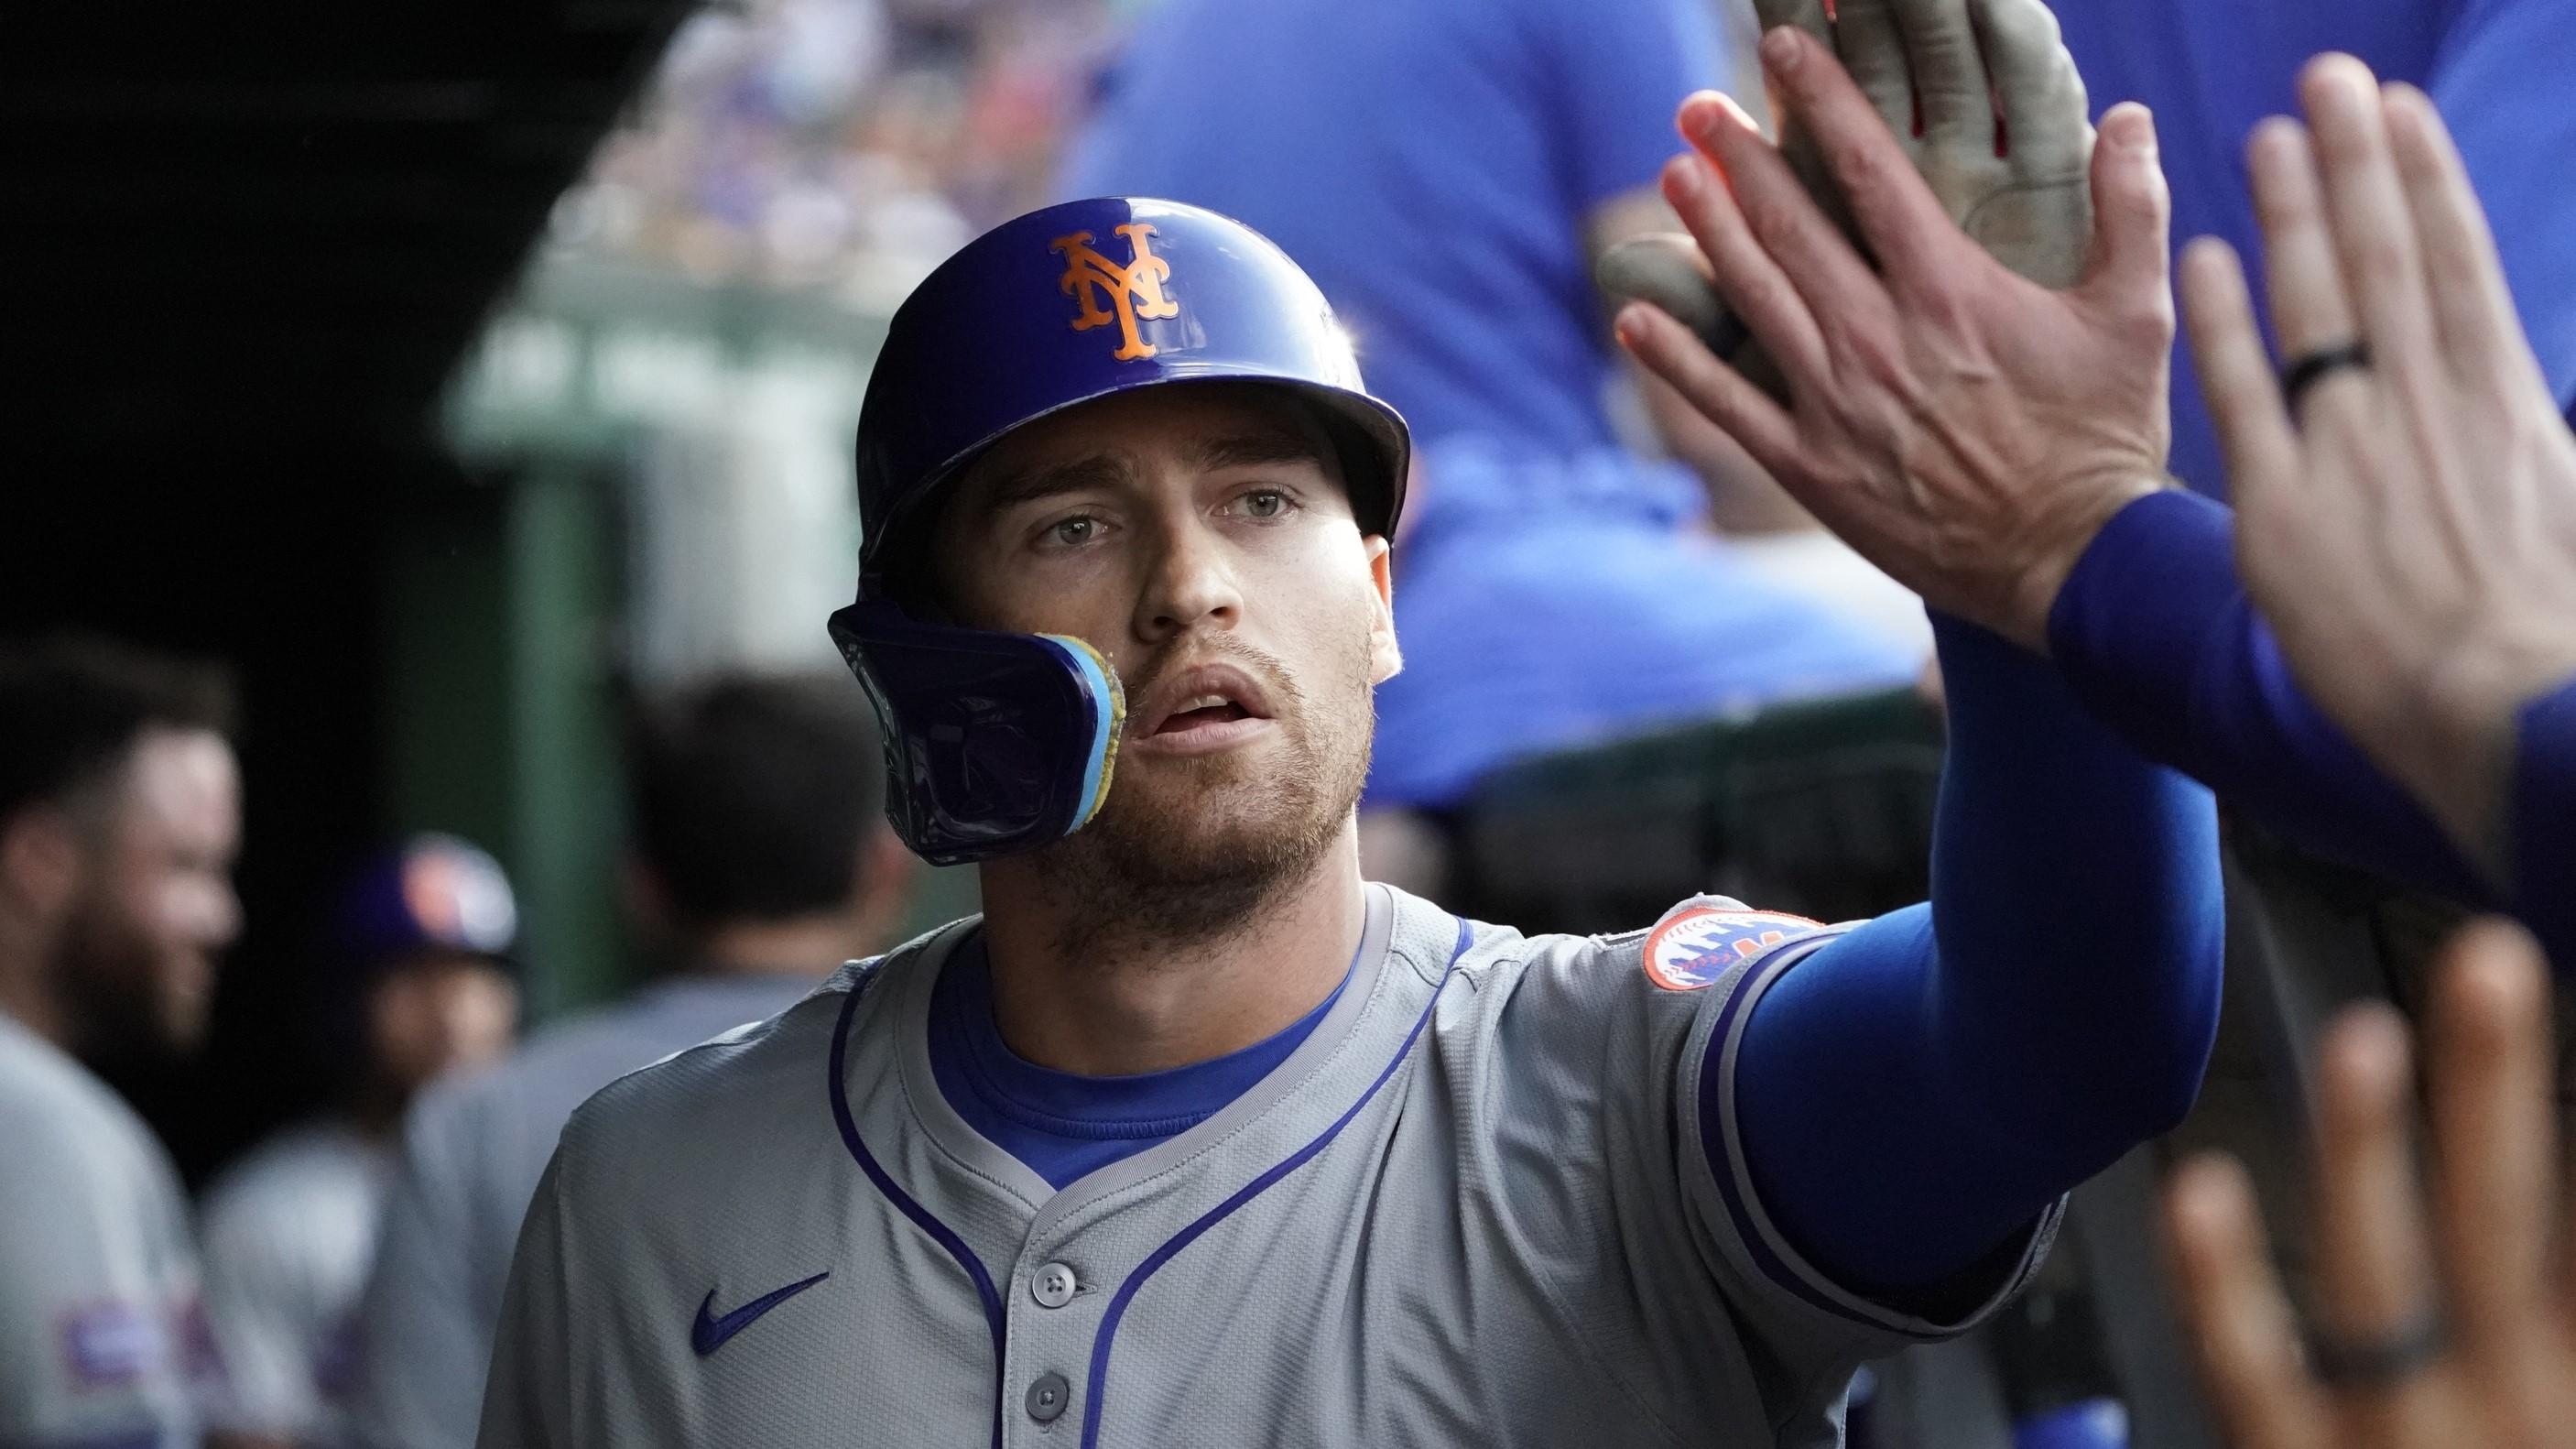 Mets’ Brandon Nimmo relishing clutch moments in win over Nationals following fainting scare